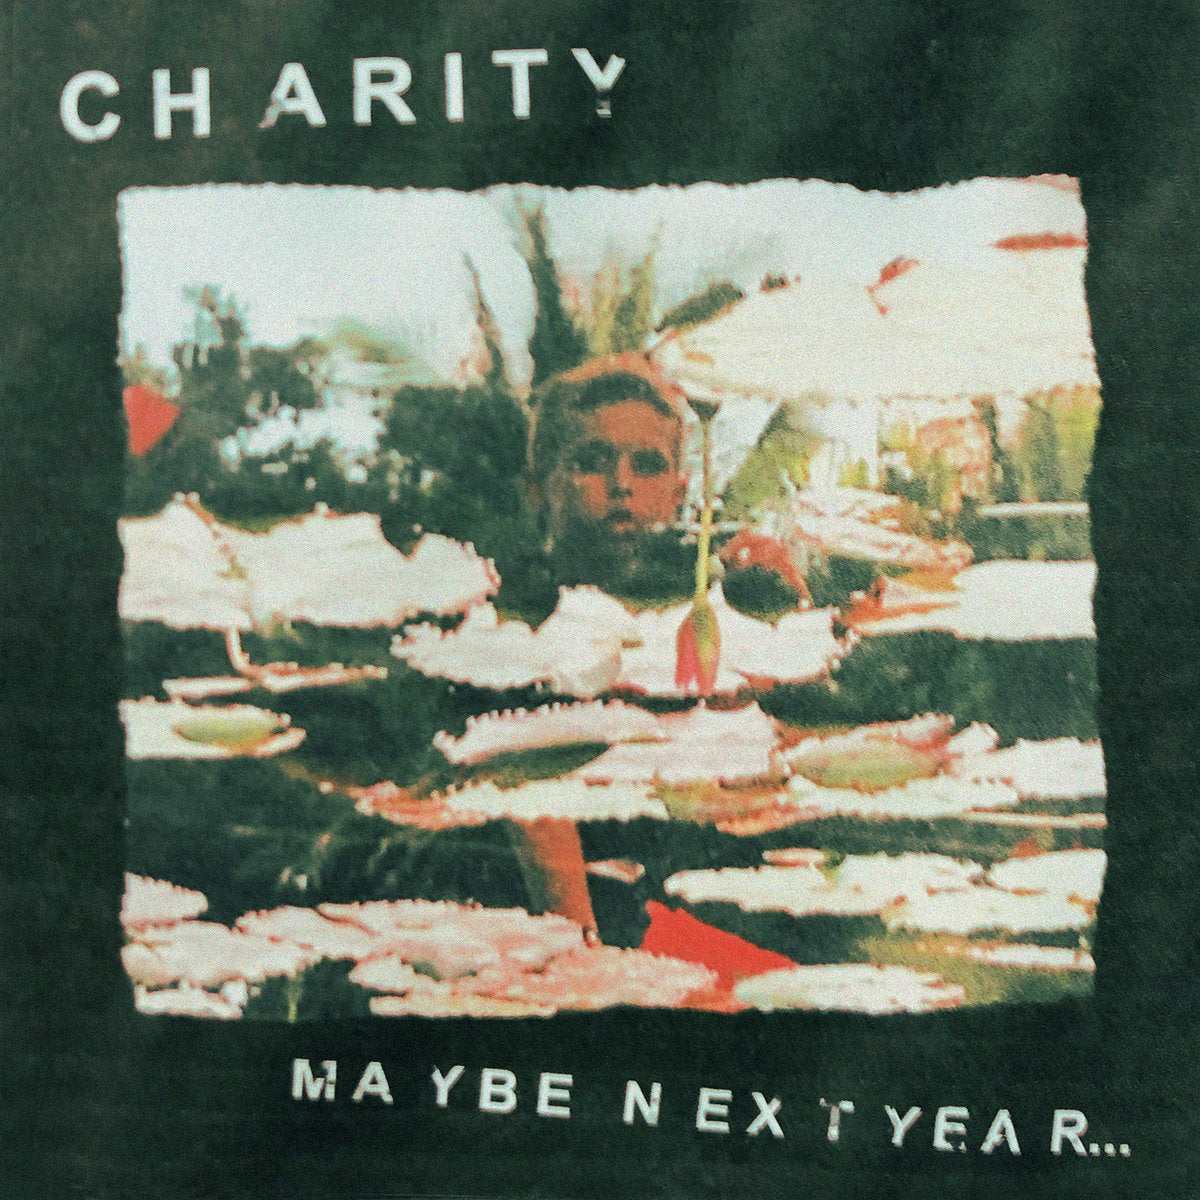 Charity "Maybe Next Year" Cassette